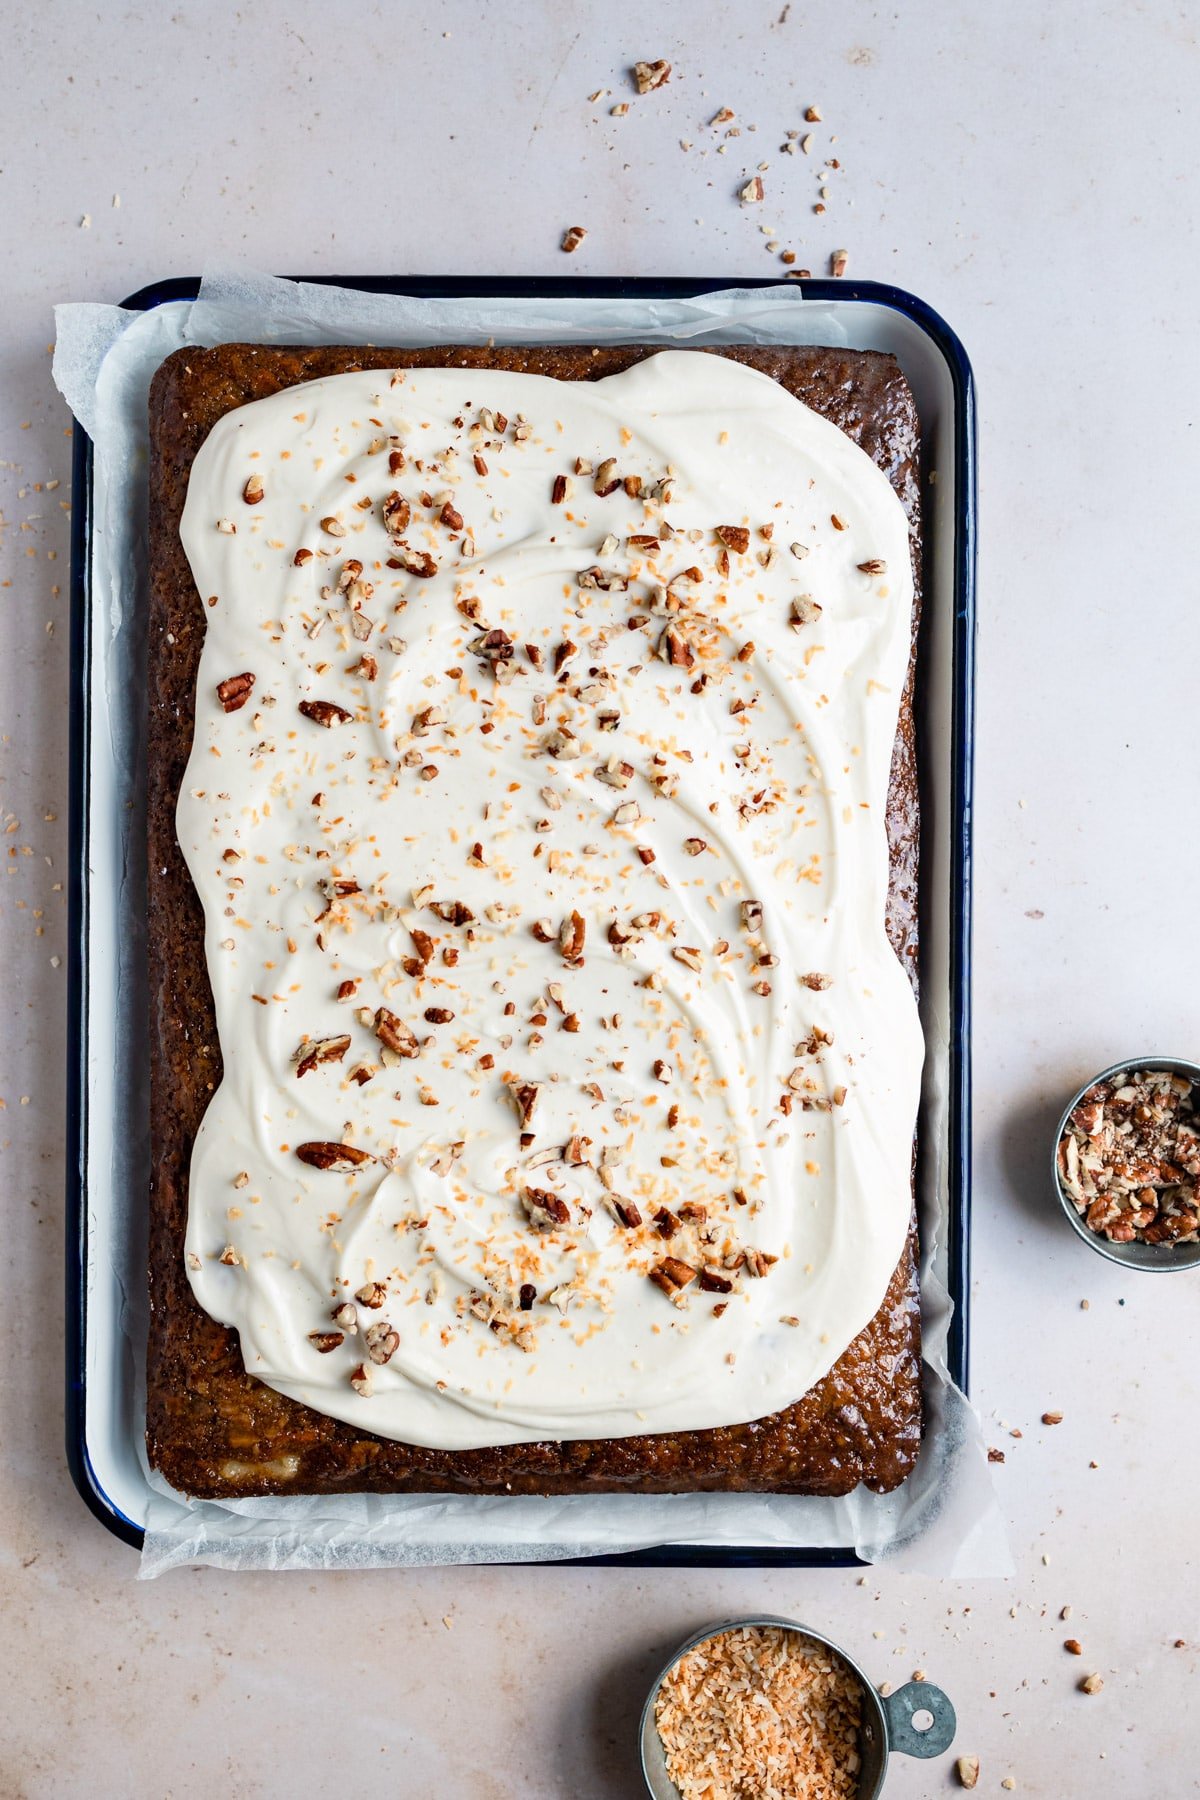 Frosted carrot sheet cake on a baking tray.